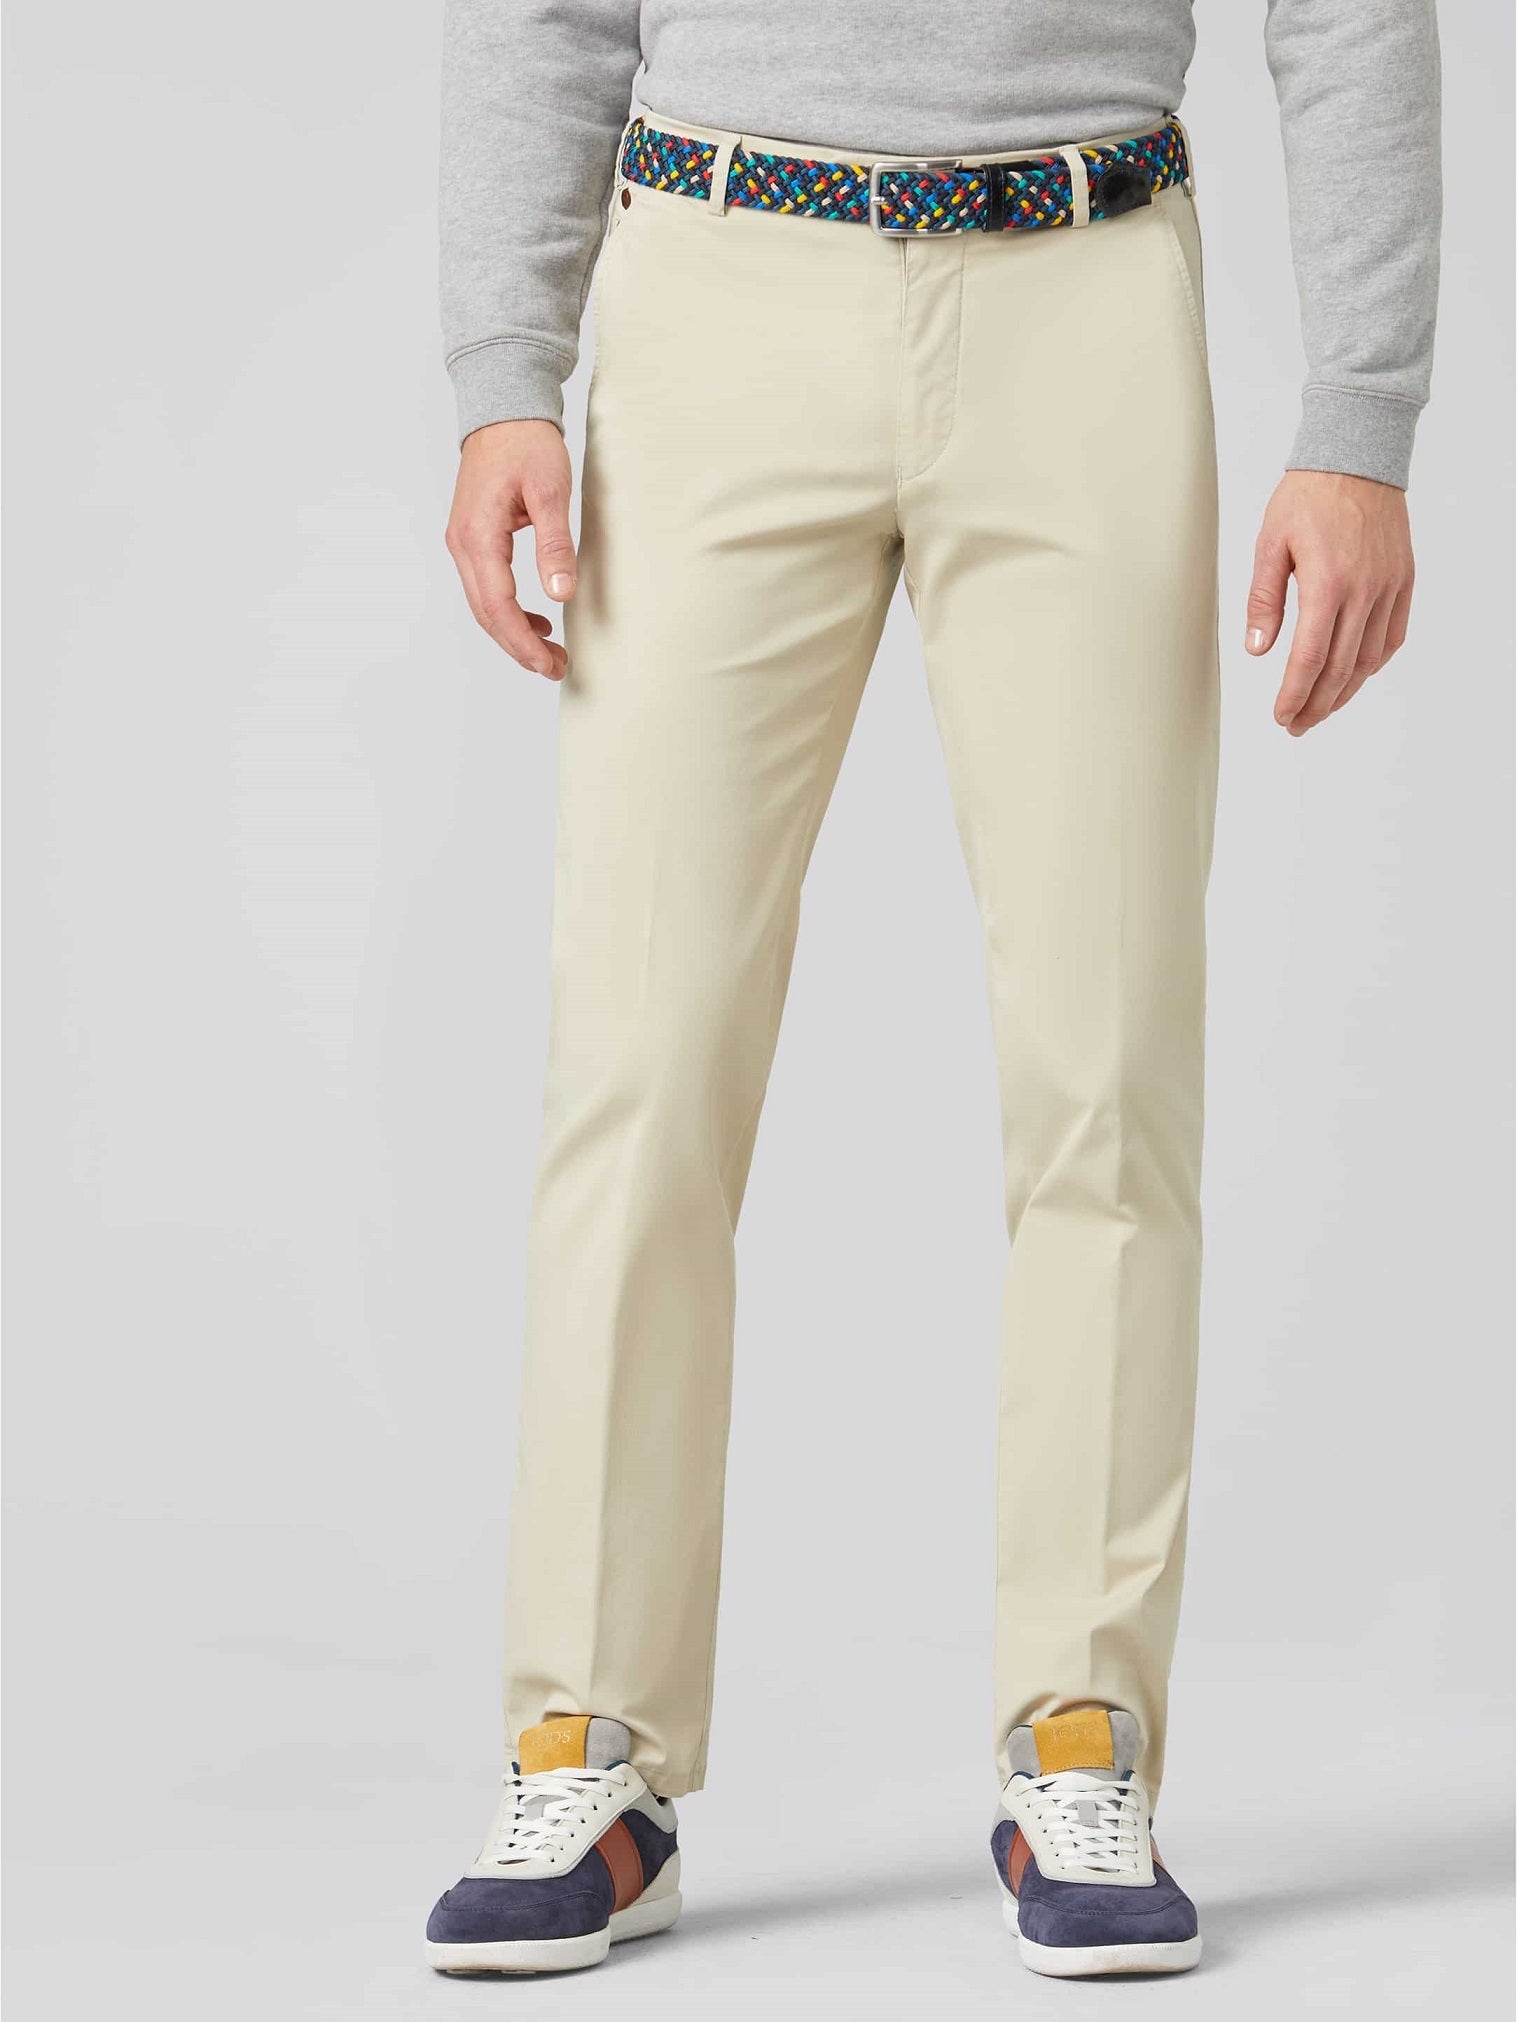 MEYER Roma Trousers - 3001 Light-Weight Cotton Chinos - Beige